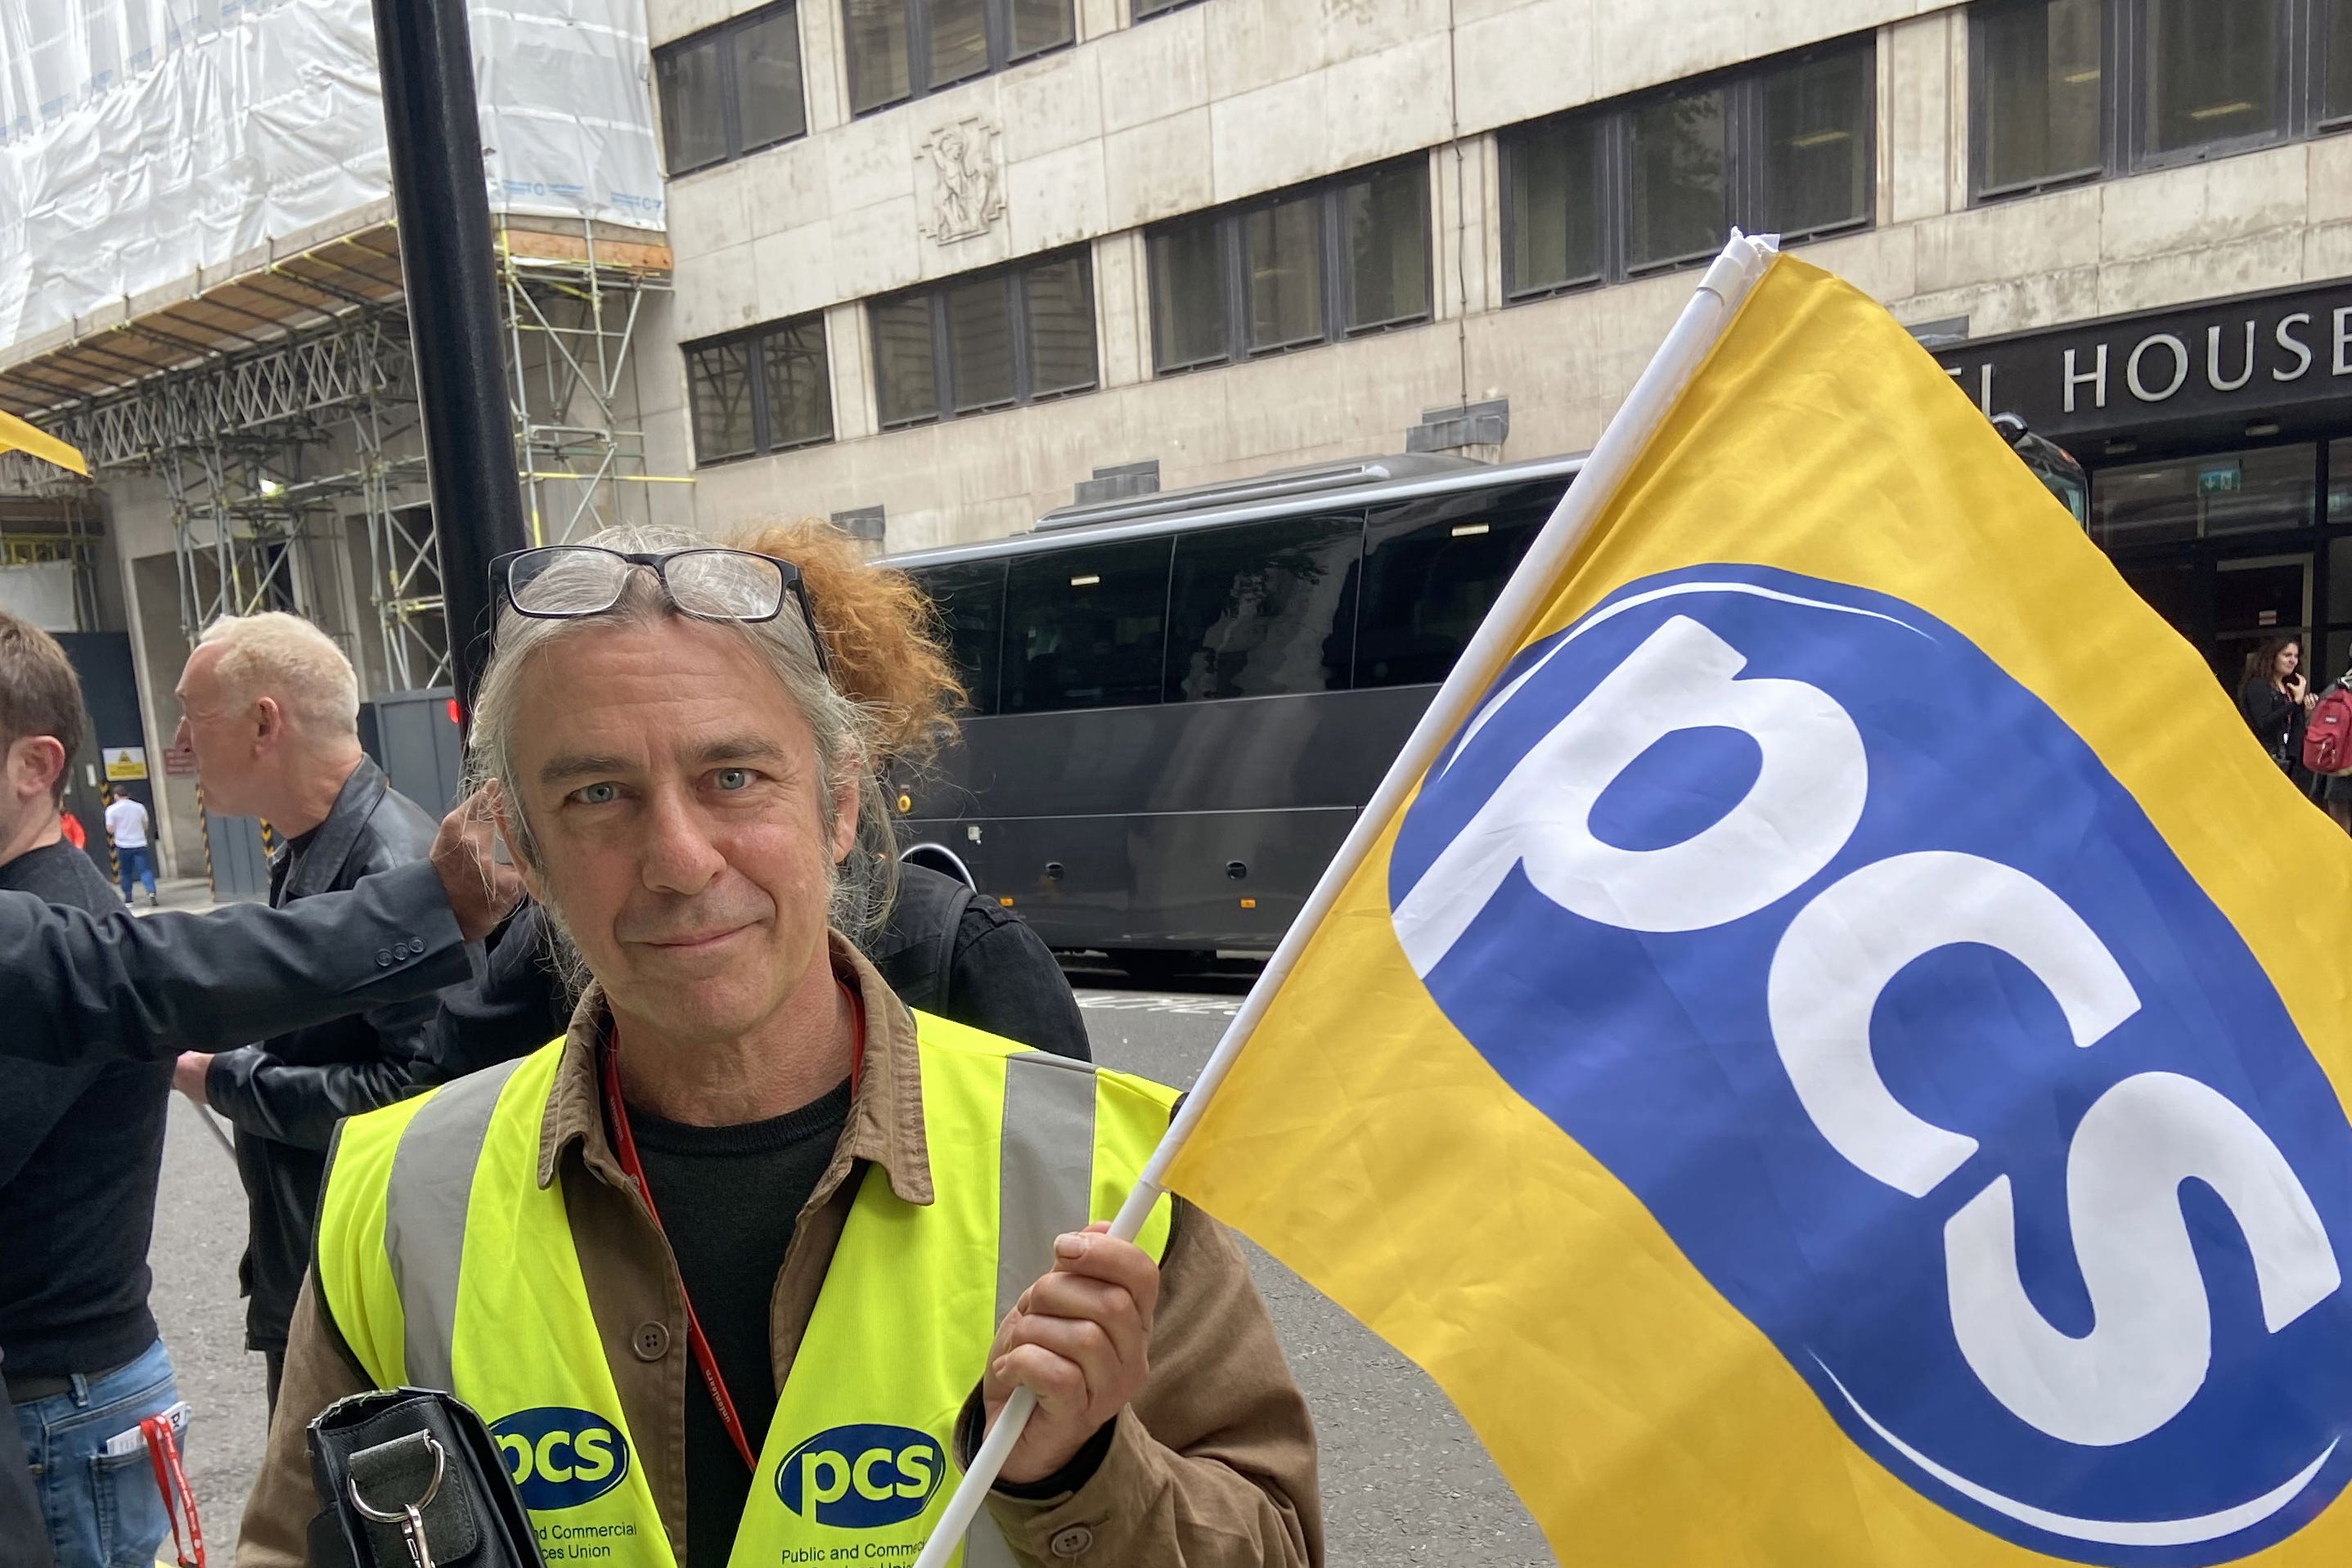 Members of the PCS union have voted to strike over pay, pensions and jobs